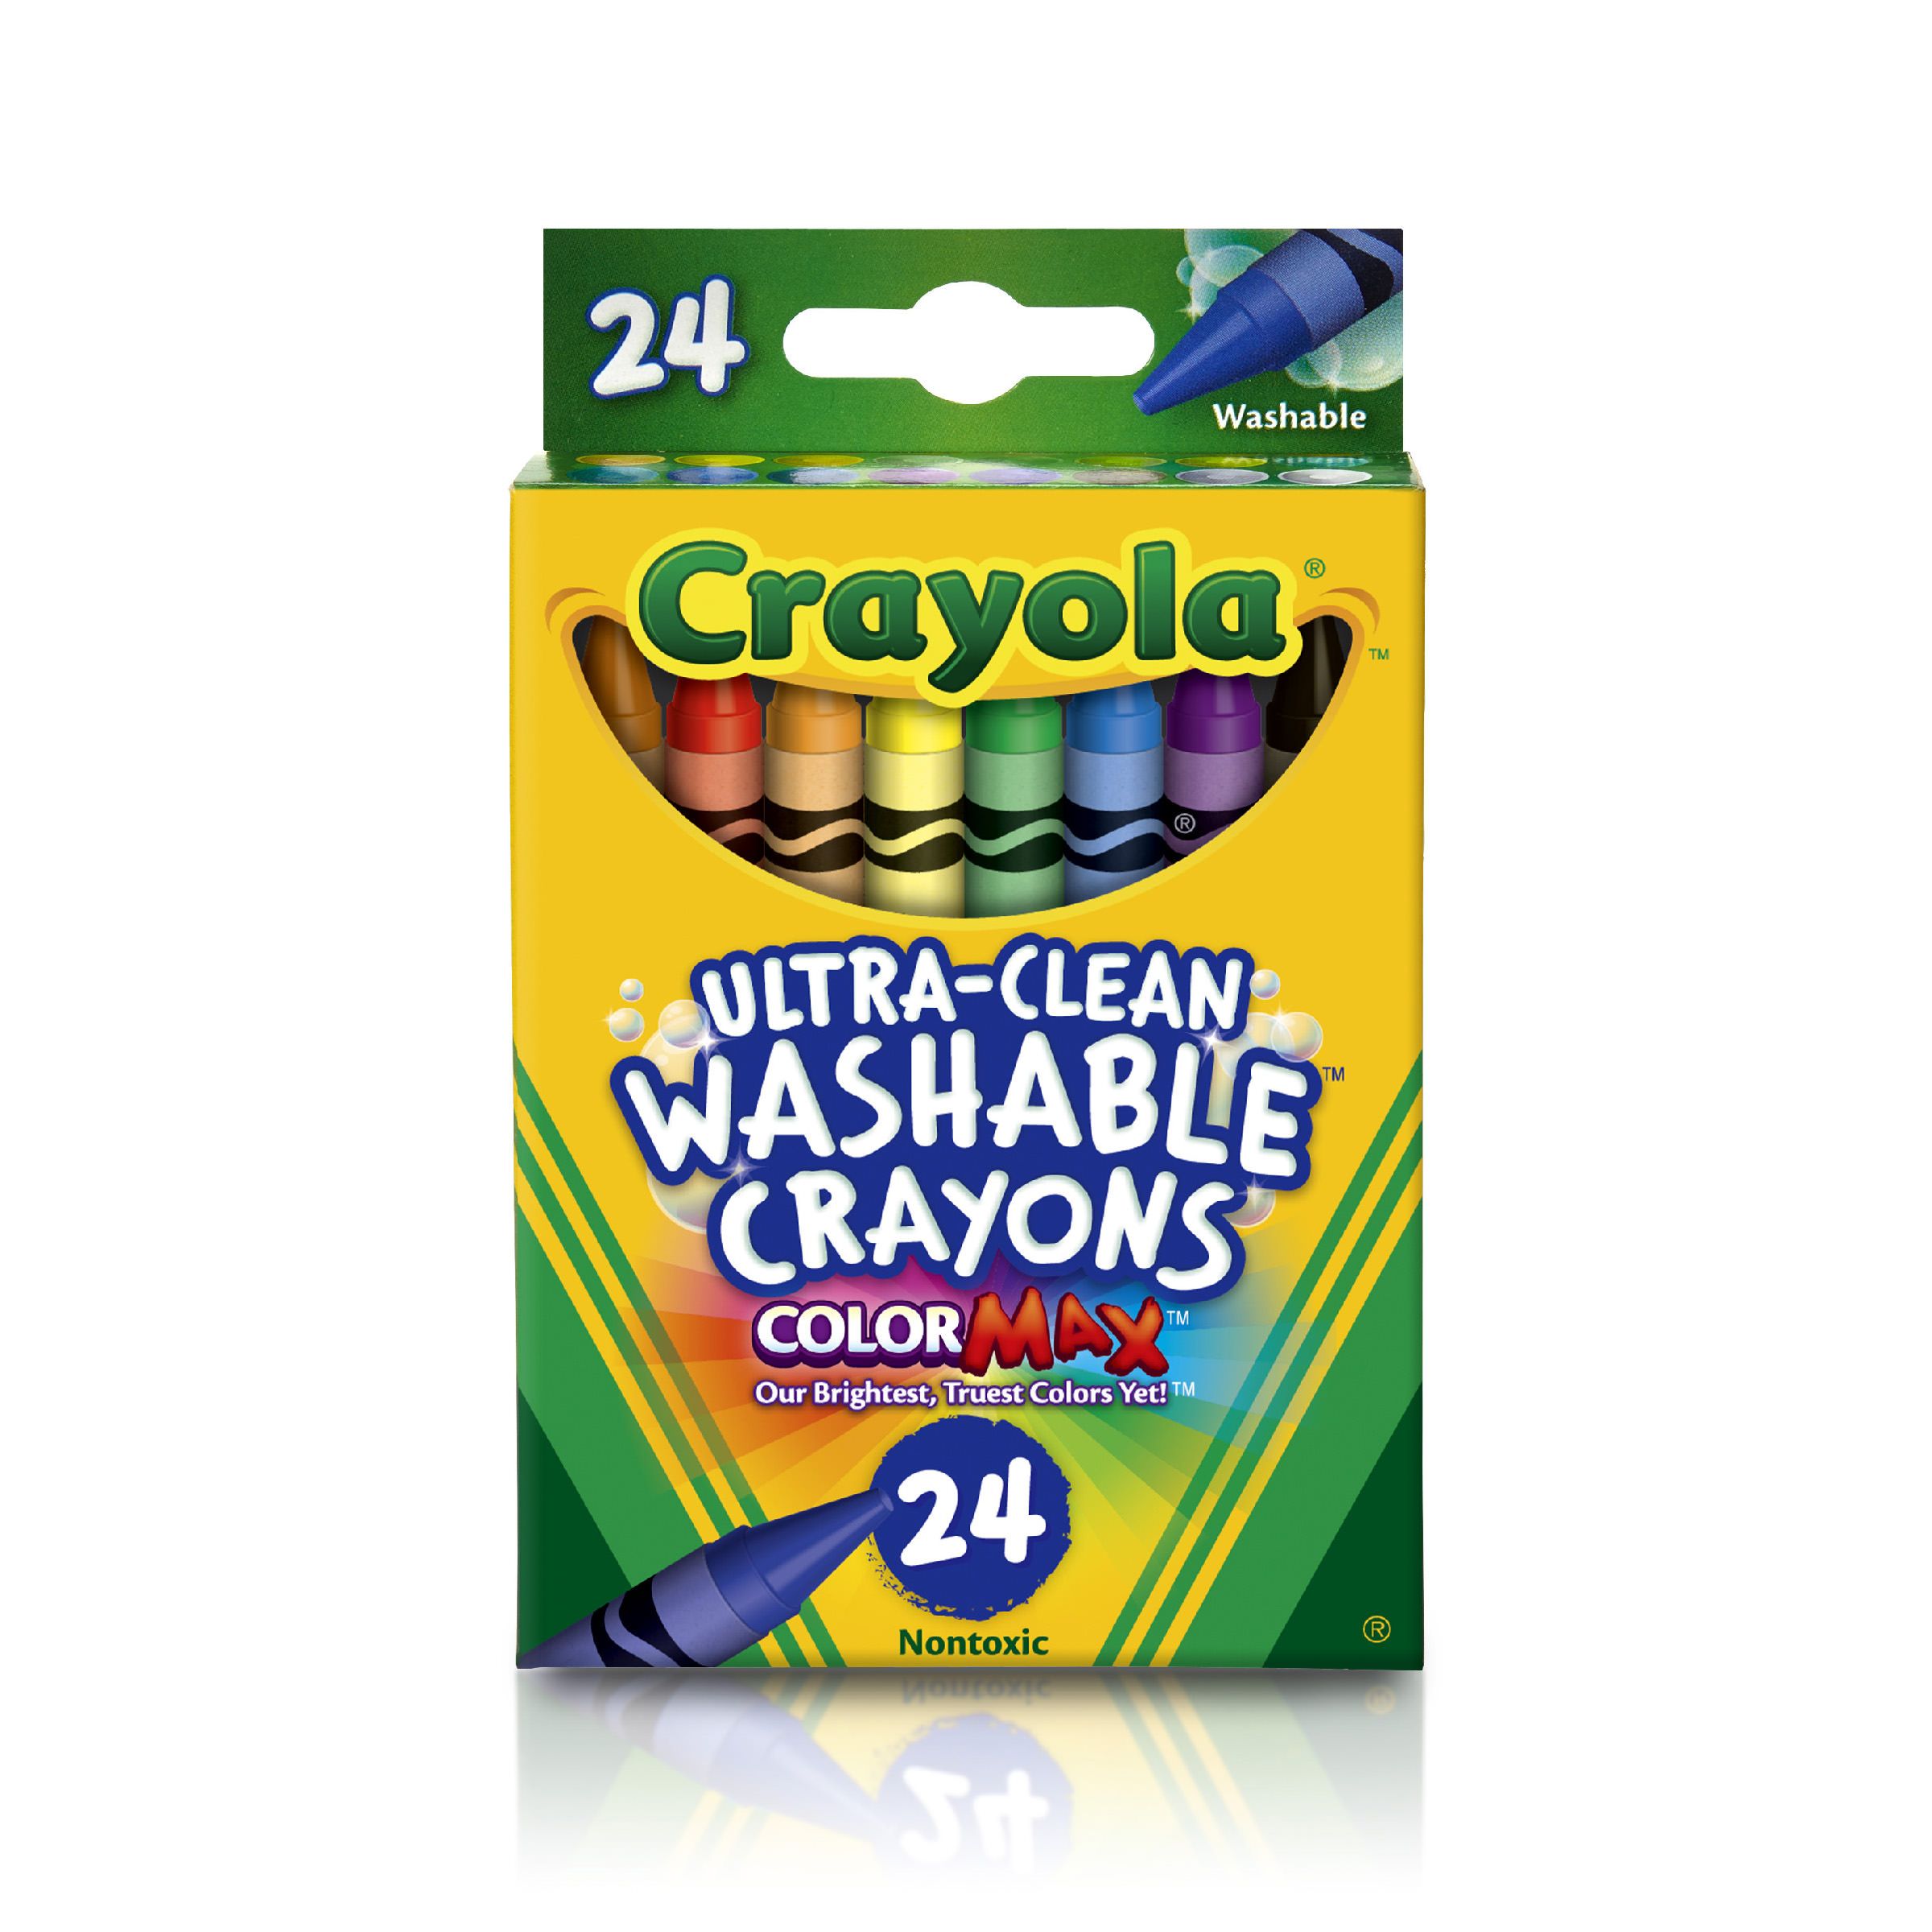 Crayola adds new shade of blue to box of crayons (and it needs a name)